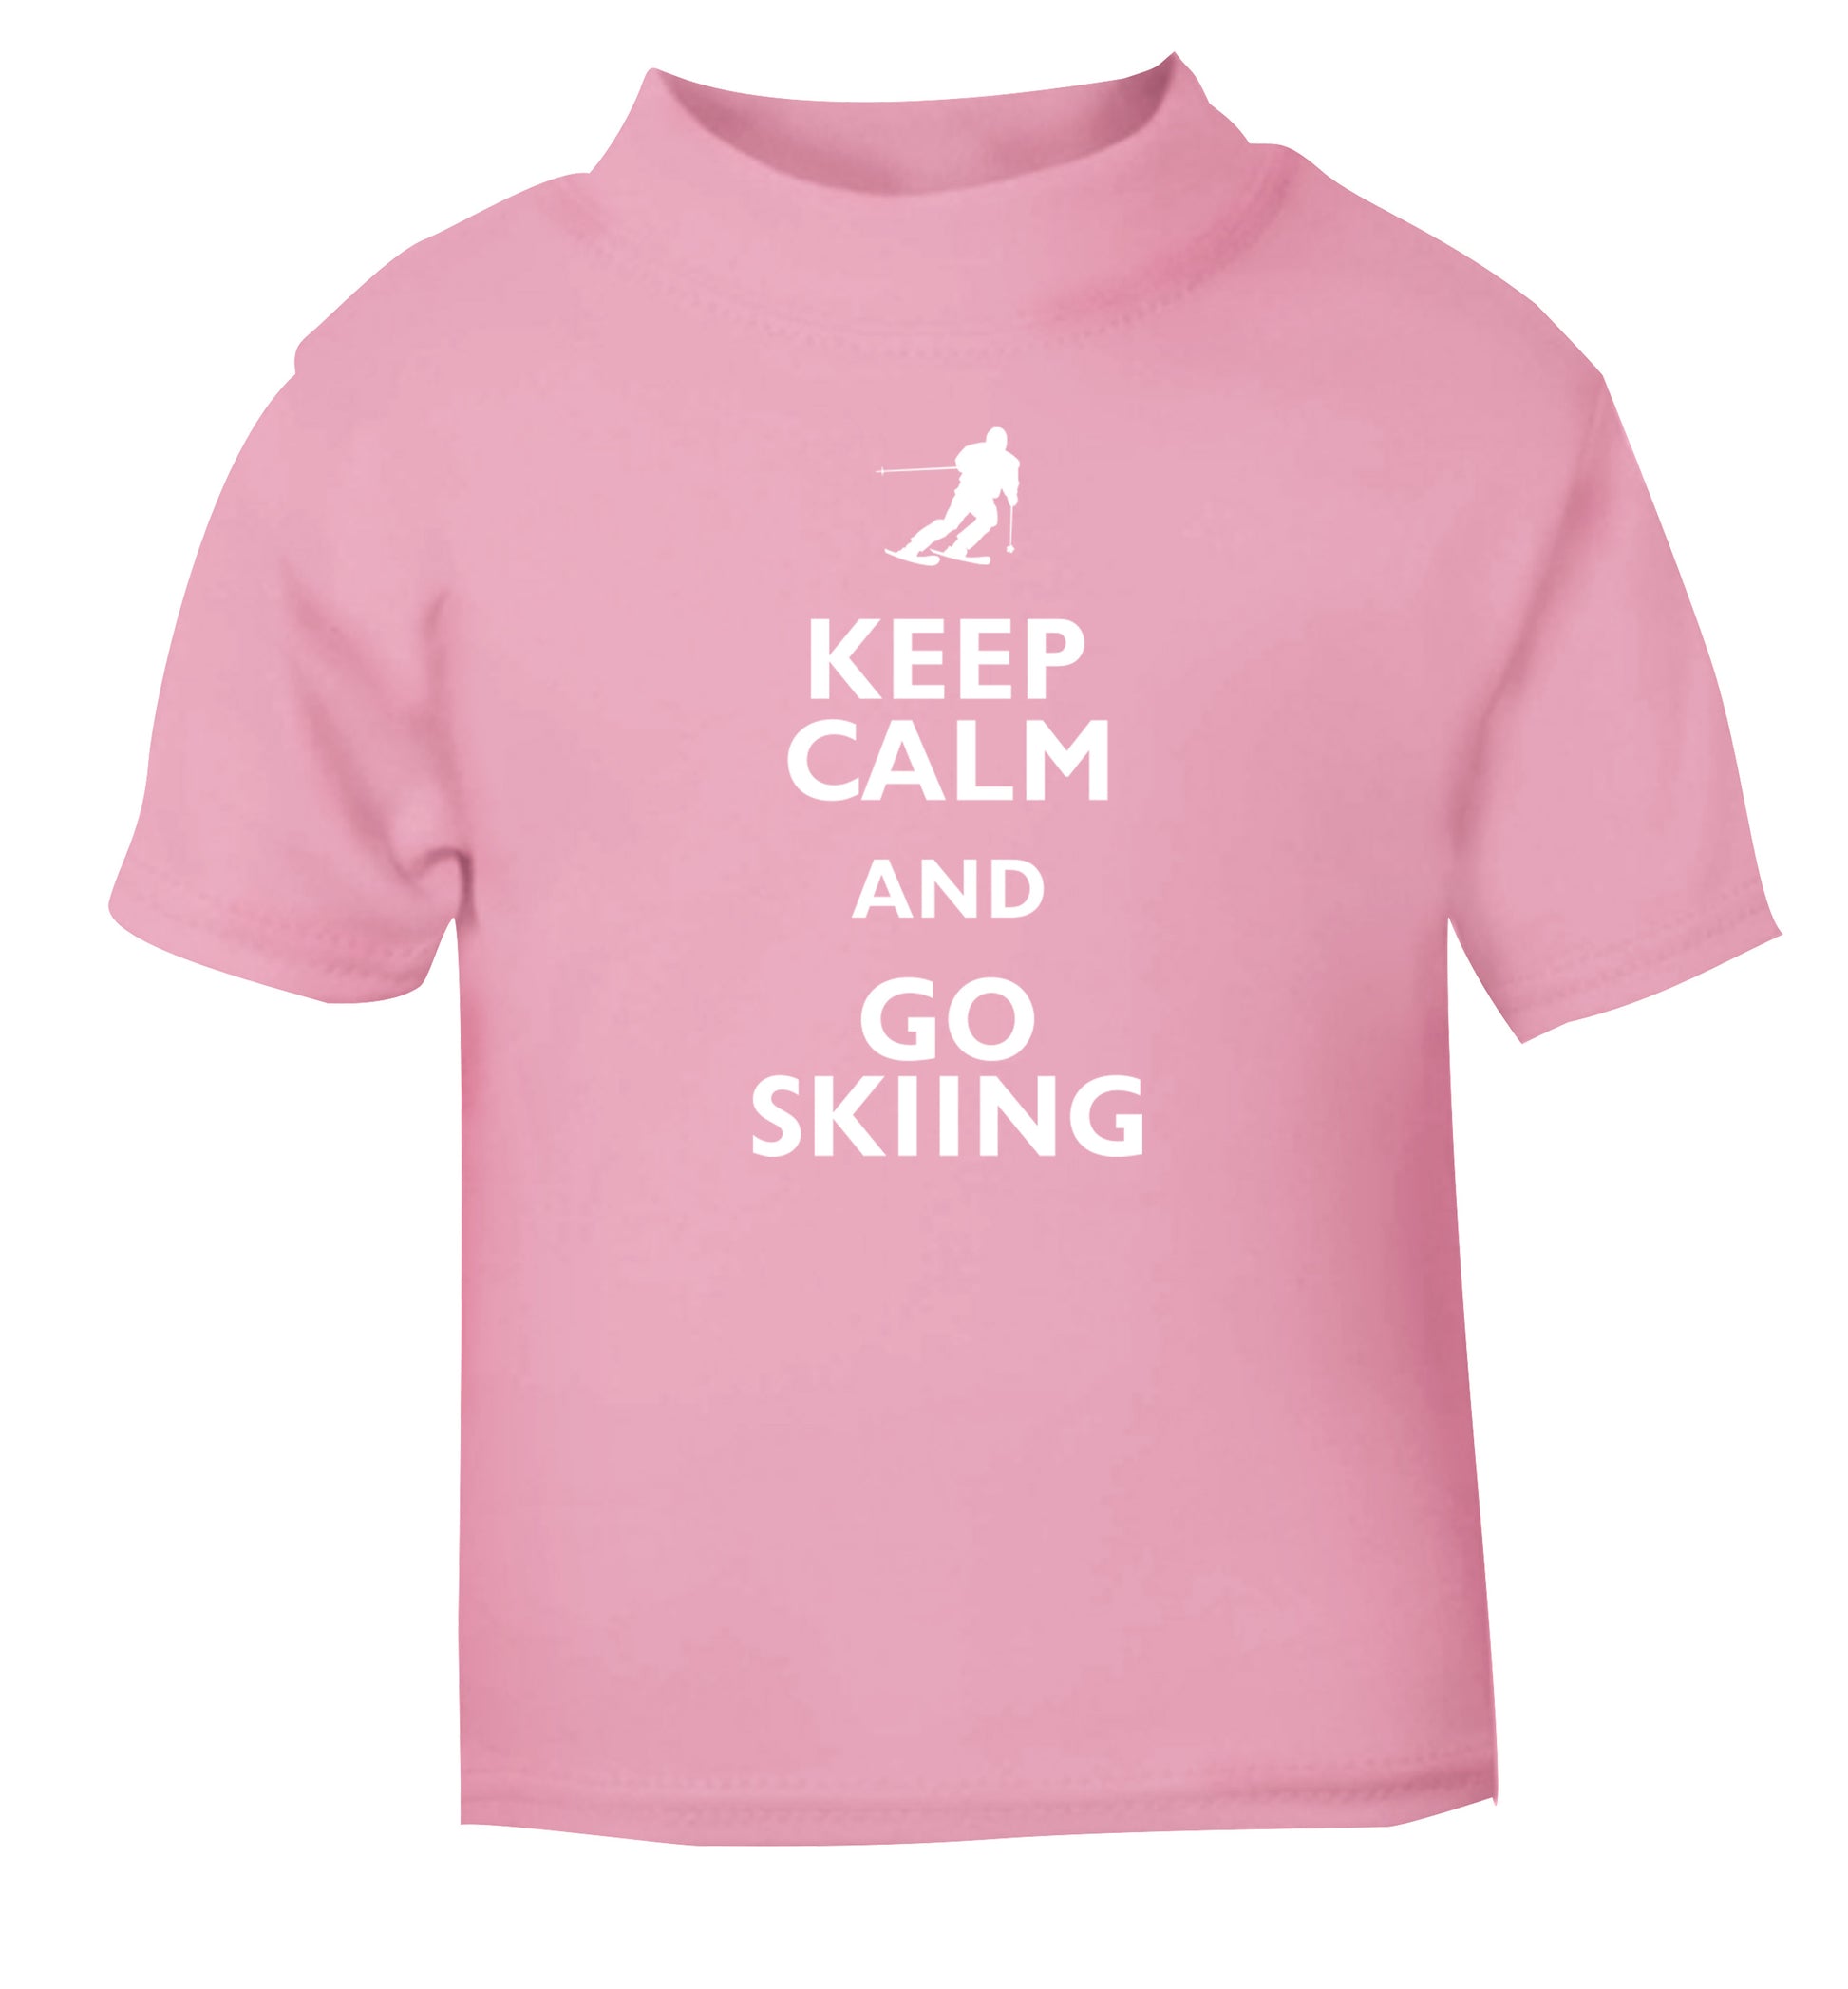 Keep calm and go skiing light pink Baby Toddler Tshirt 2 Years